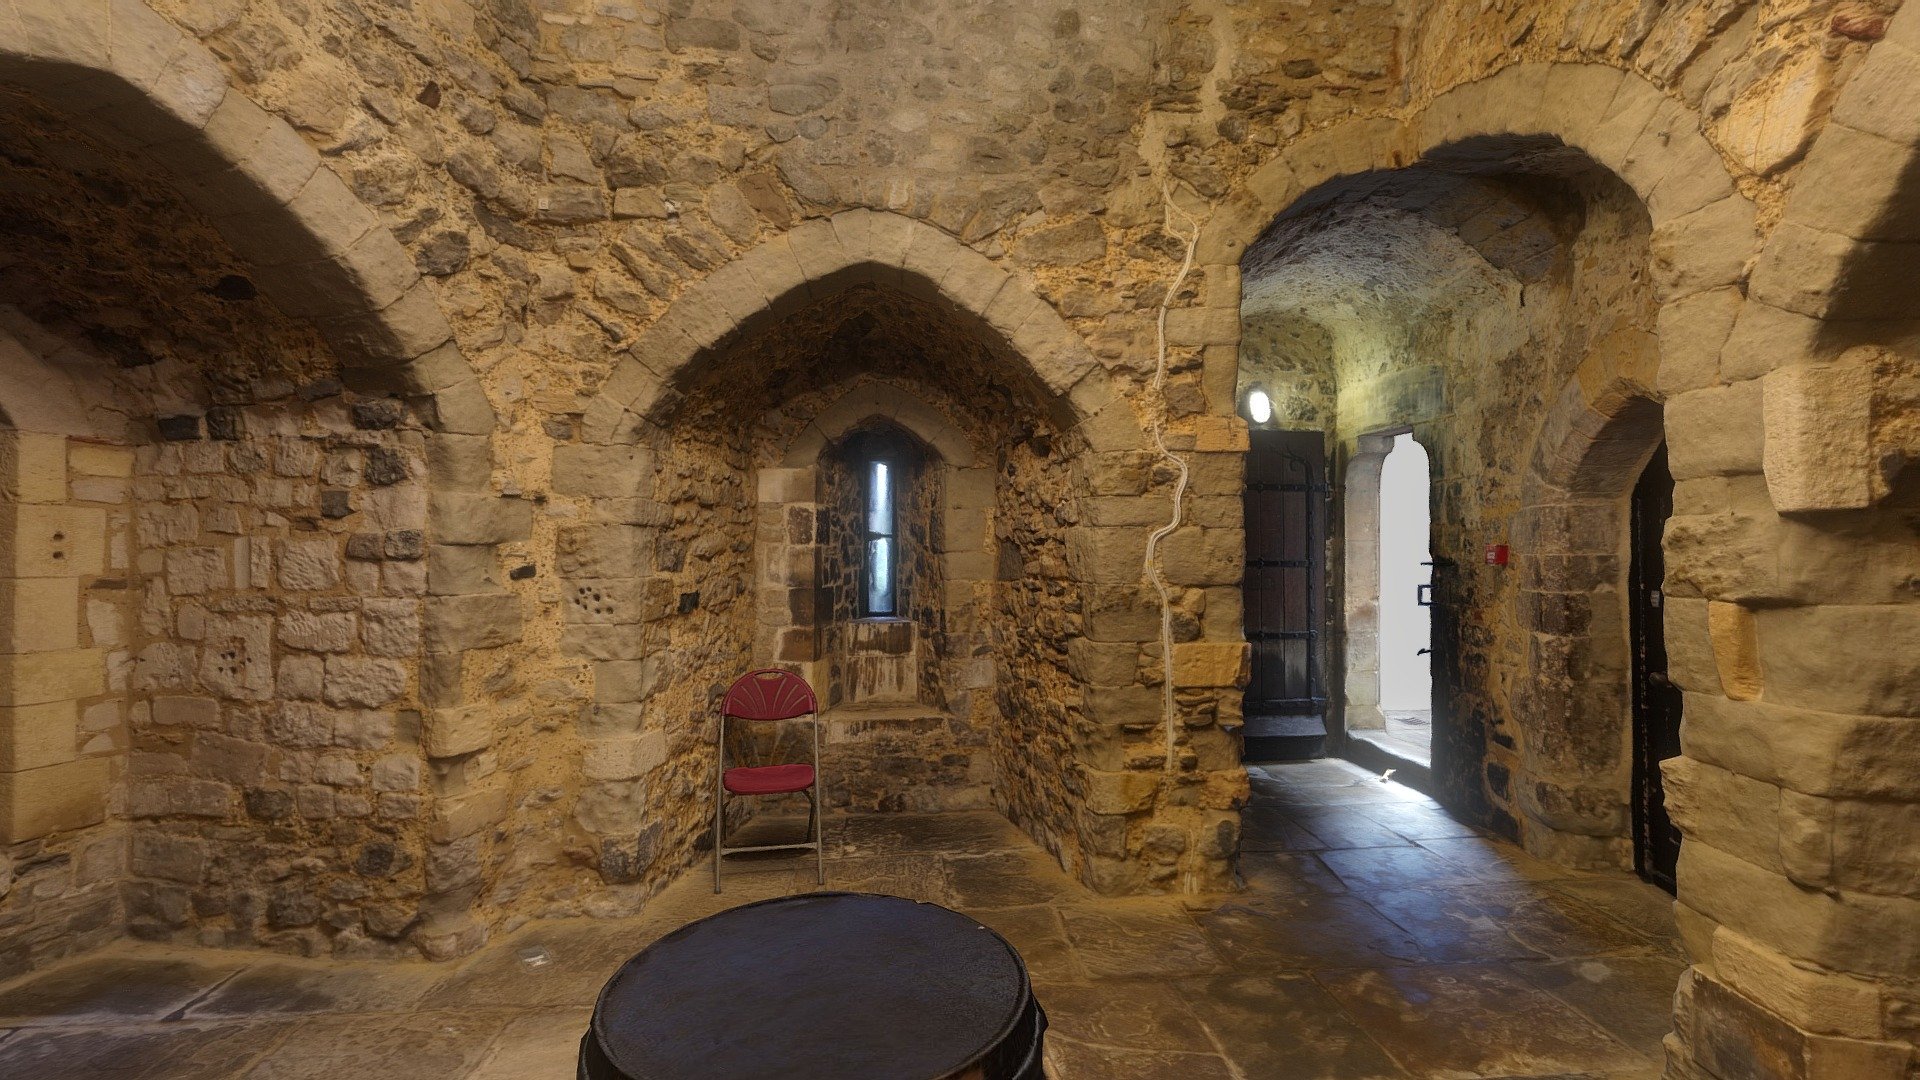 Located in the south east corner of the Tower of London.

From the information board: &ldquo;This tower is part of Henry III's late 1230s curtain wall, which rings the castle&hellip; this tower overlooked the river. Archers could shoot arrows through the arrow-loops in this room. Upstairs was a comfortable chamber with a huge fireplace and decorative window. The tower's exterior windows were restored in 1857-8.